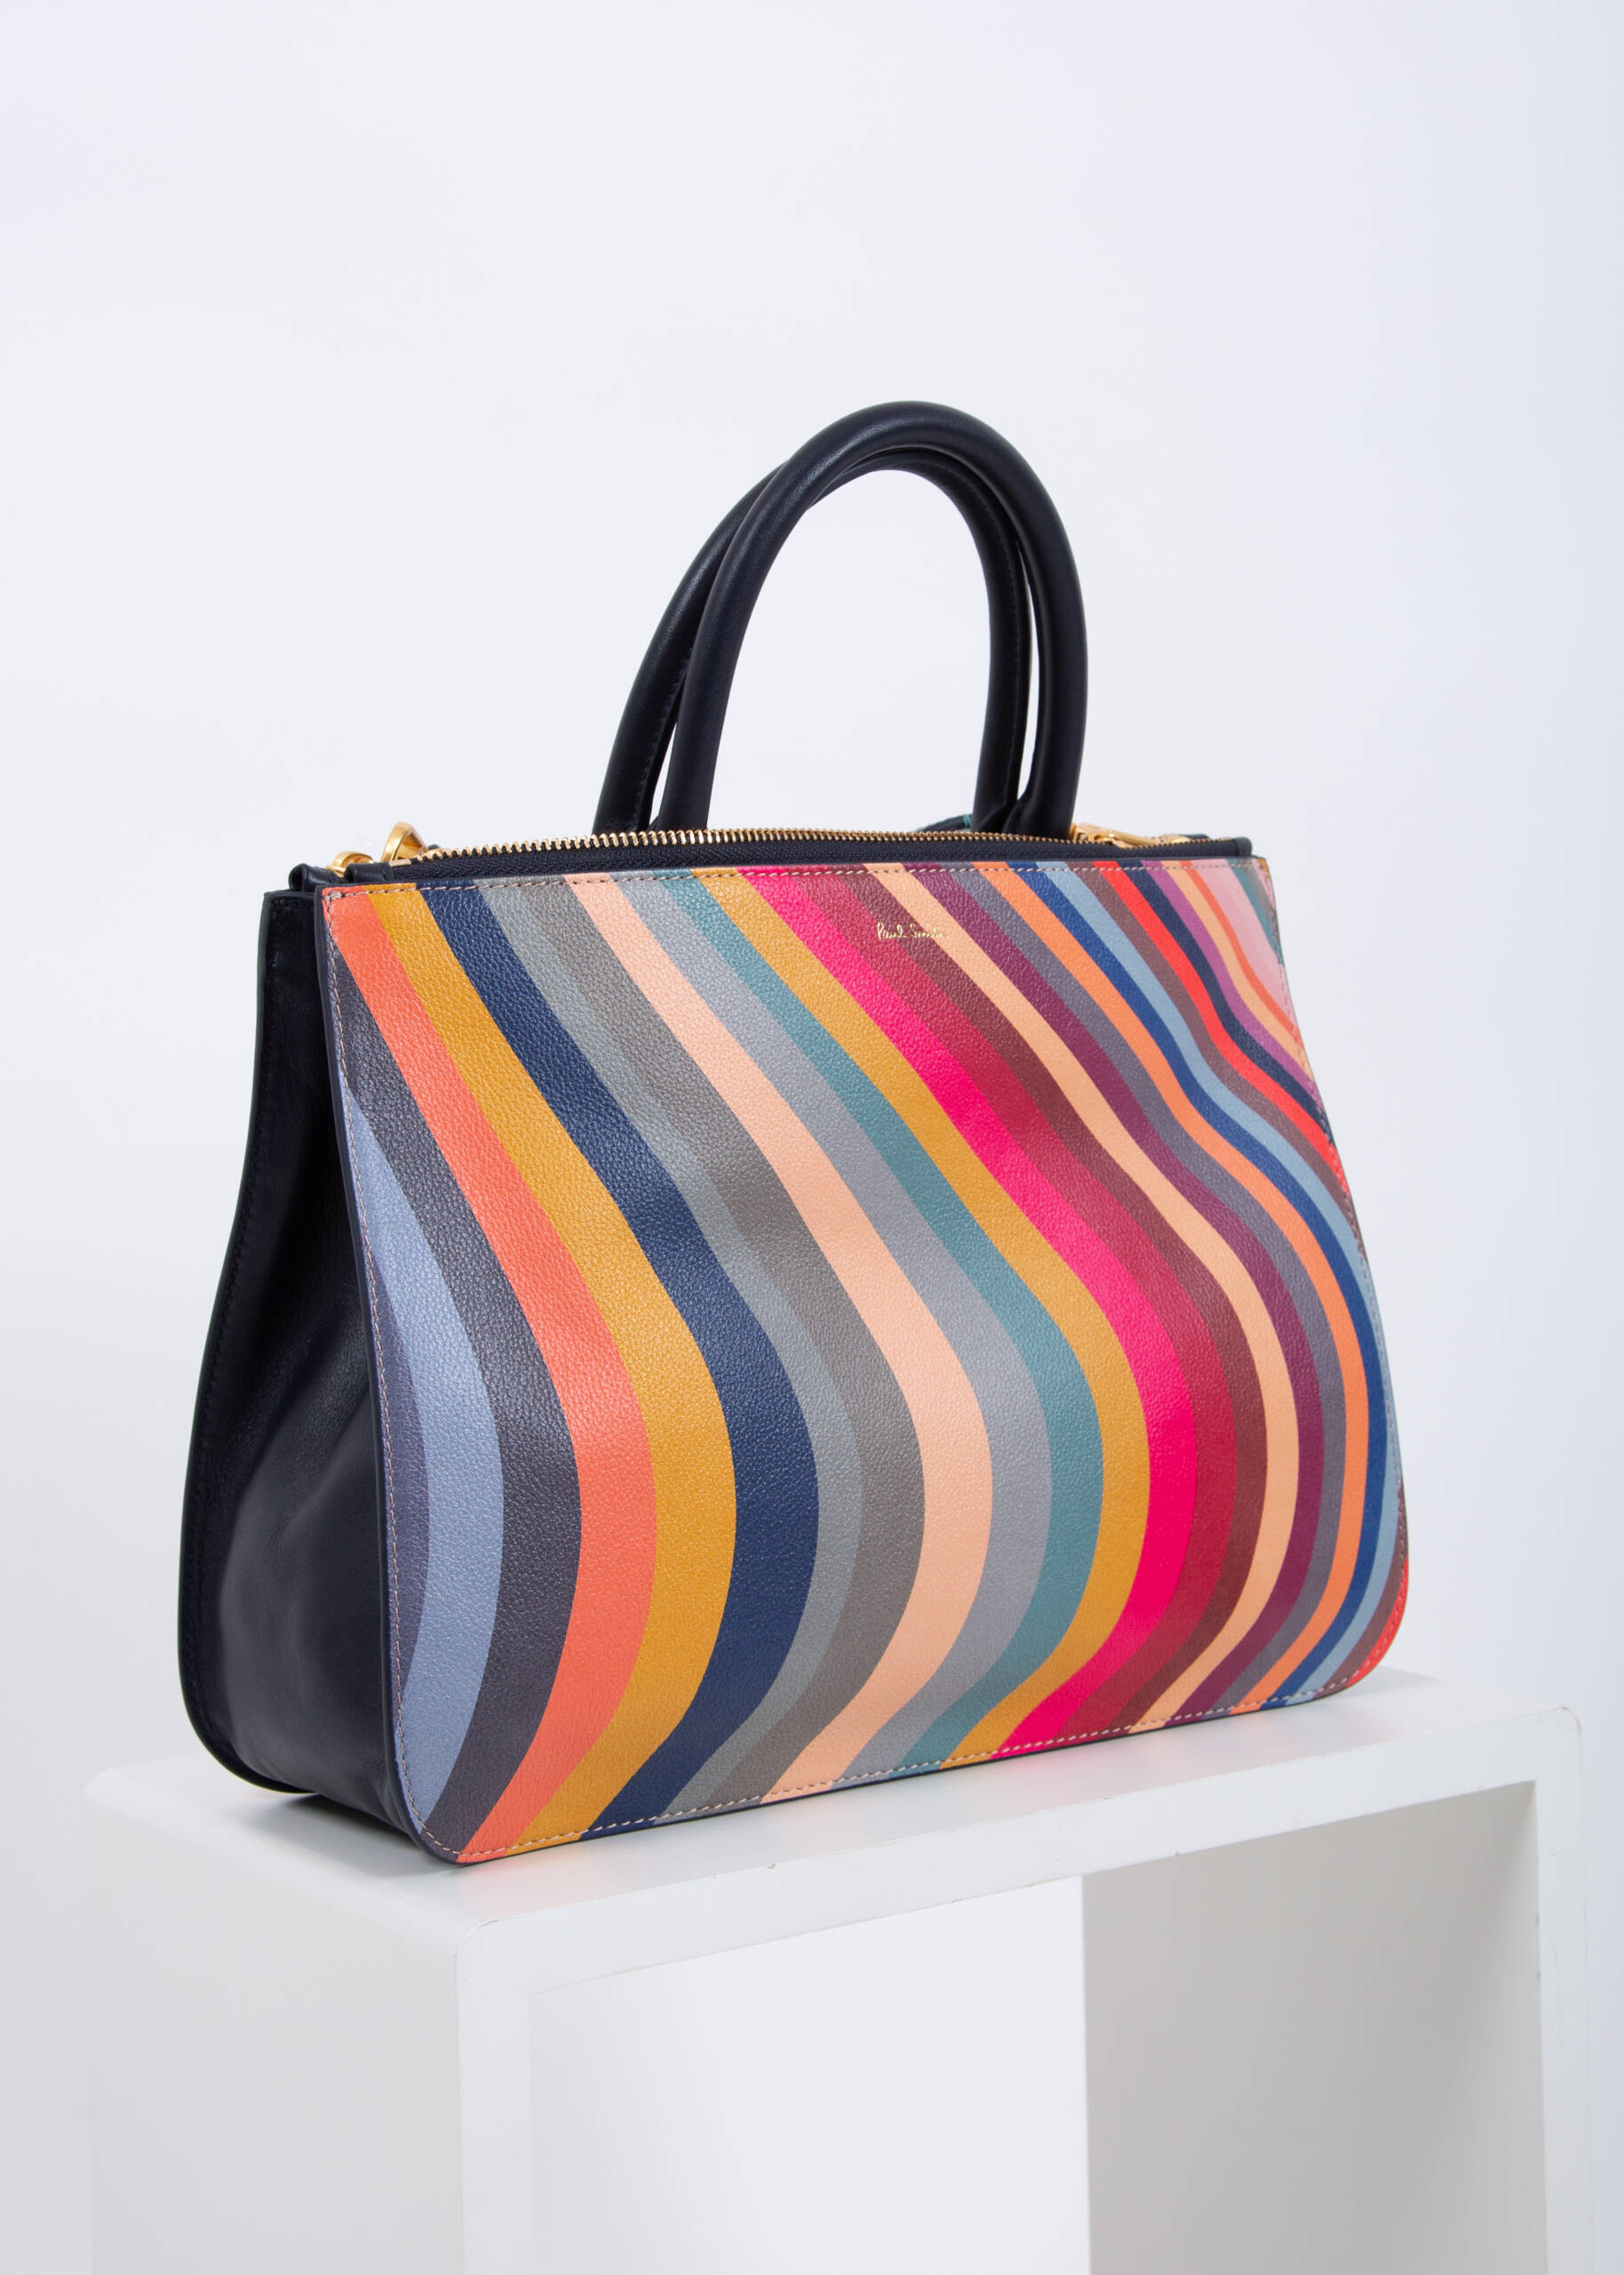 Swirl leather shopping bag by Paul Smith